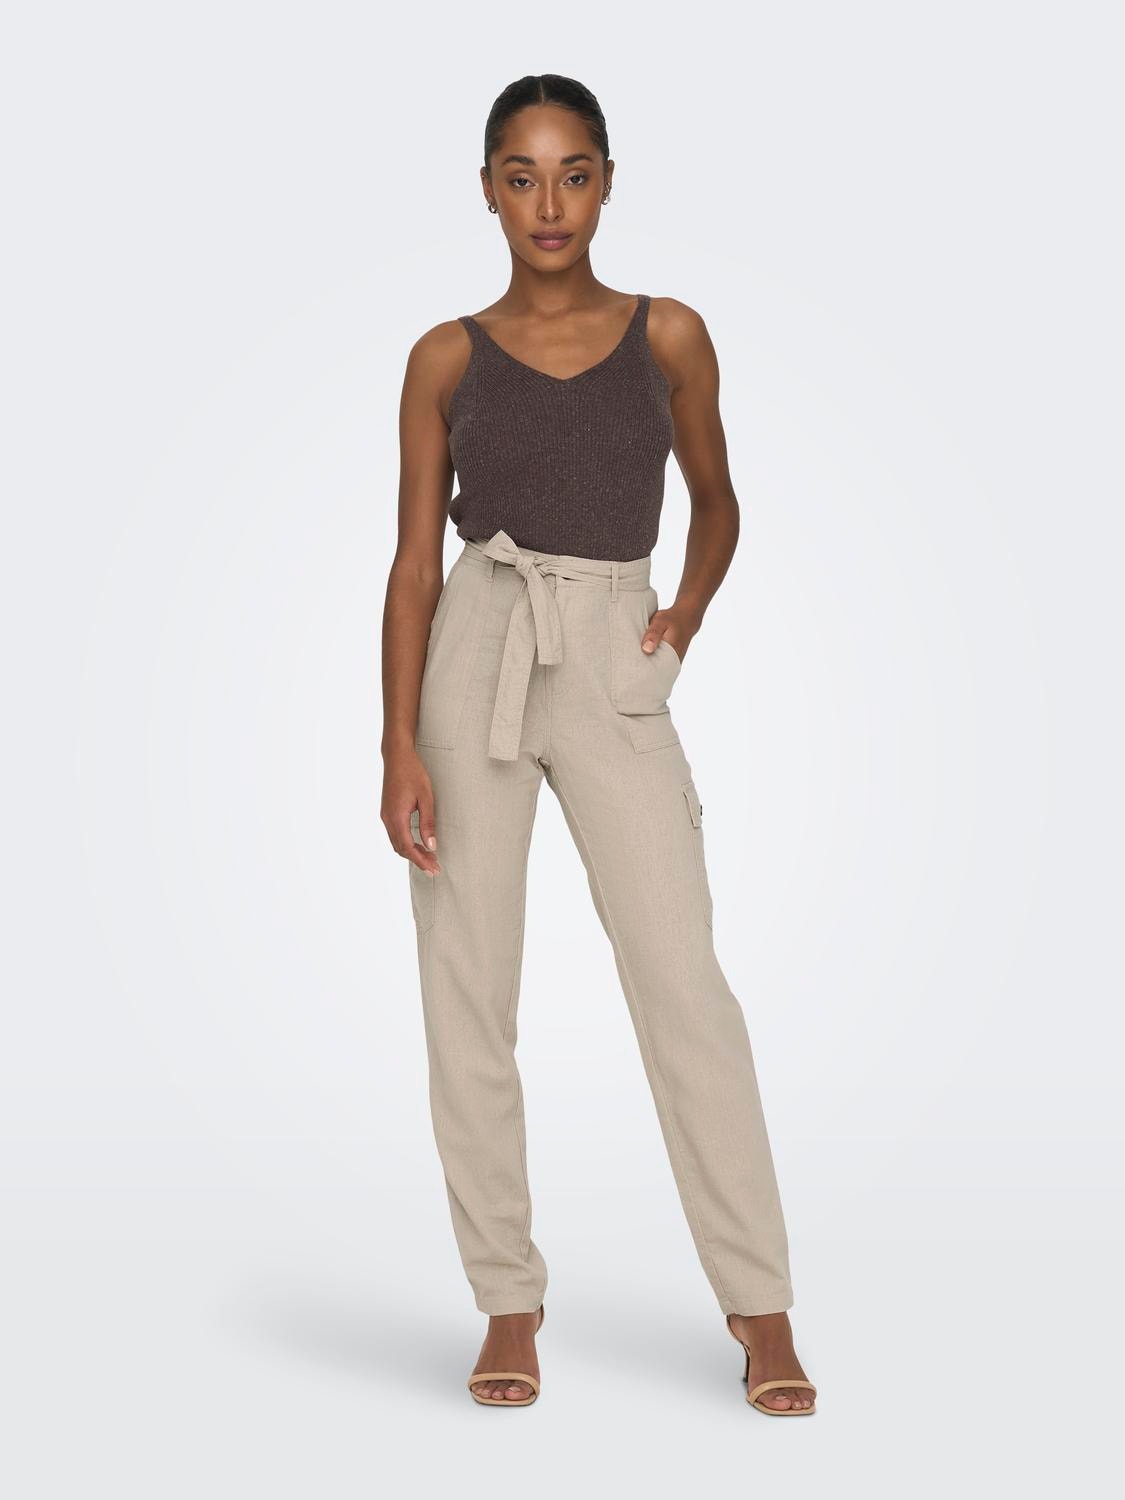 ONLY Cargo Fit High waist Trousers -Oxford Tan - 15278728